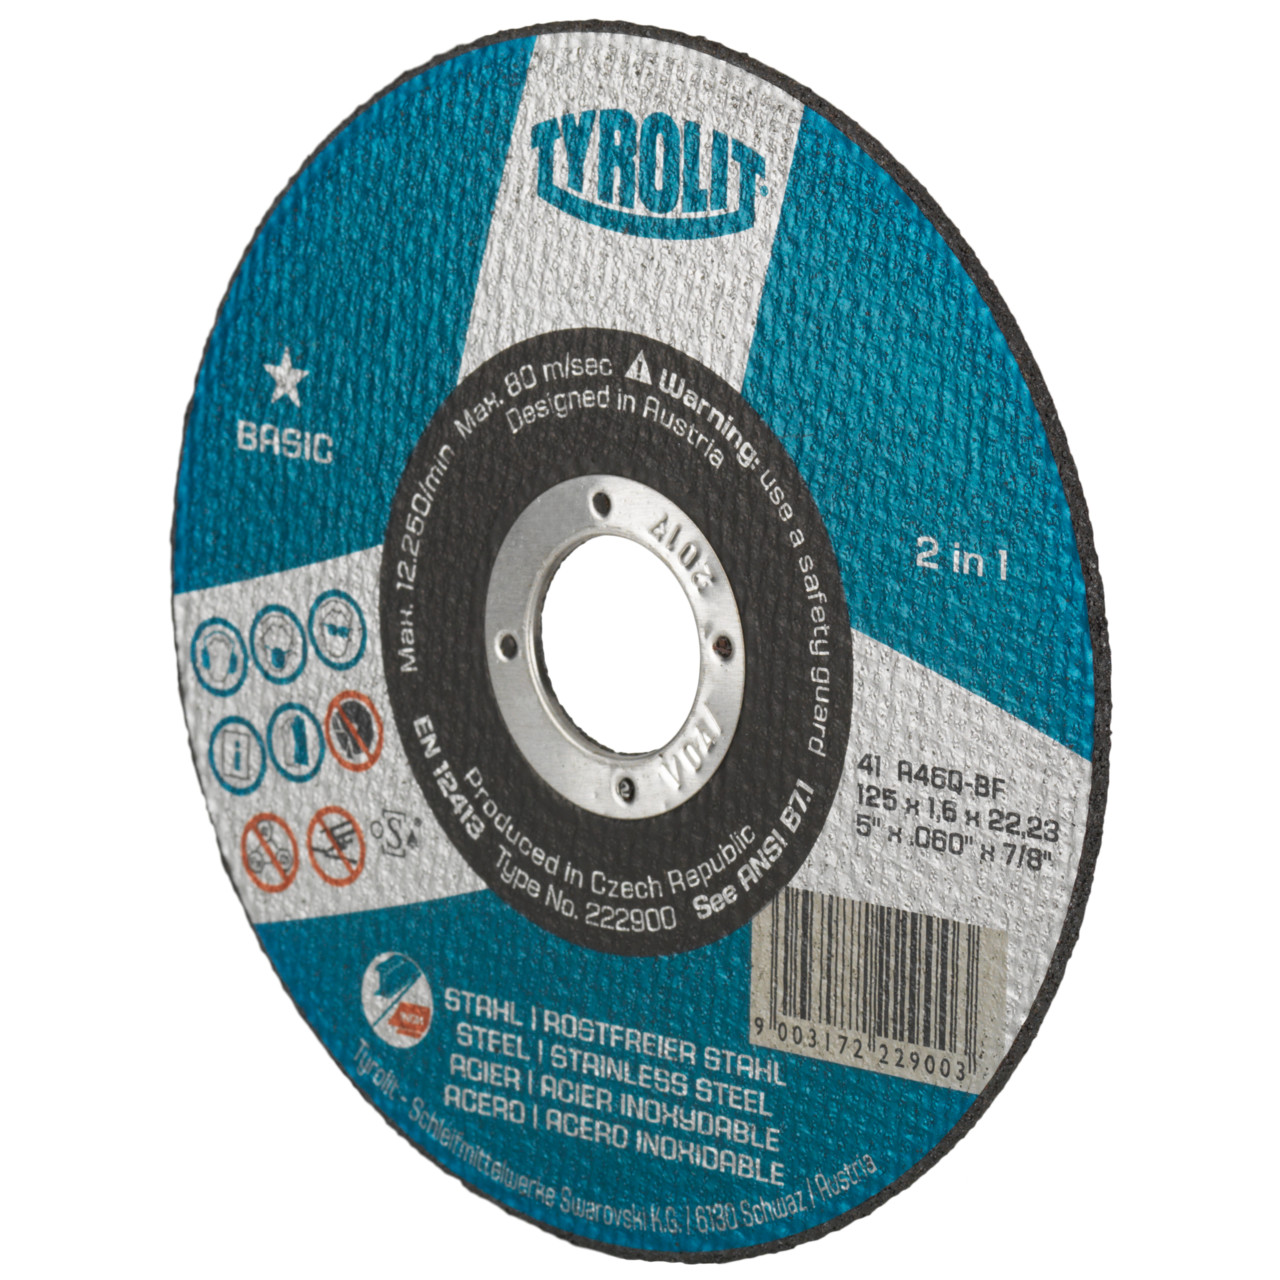 Tyrolit Cutting discs DxDxH 178x1.6x22.23 2in1 for steel and stainless steel, shape: 41 - straight version, Art. 34332875